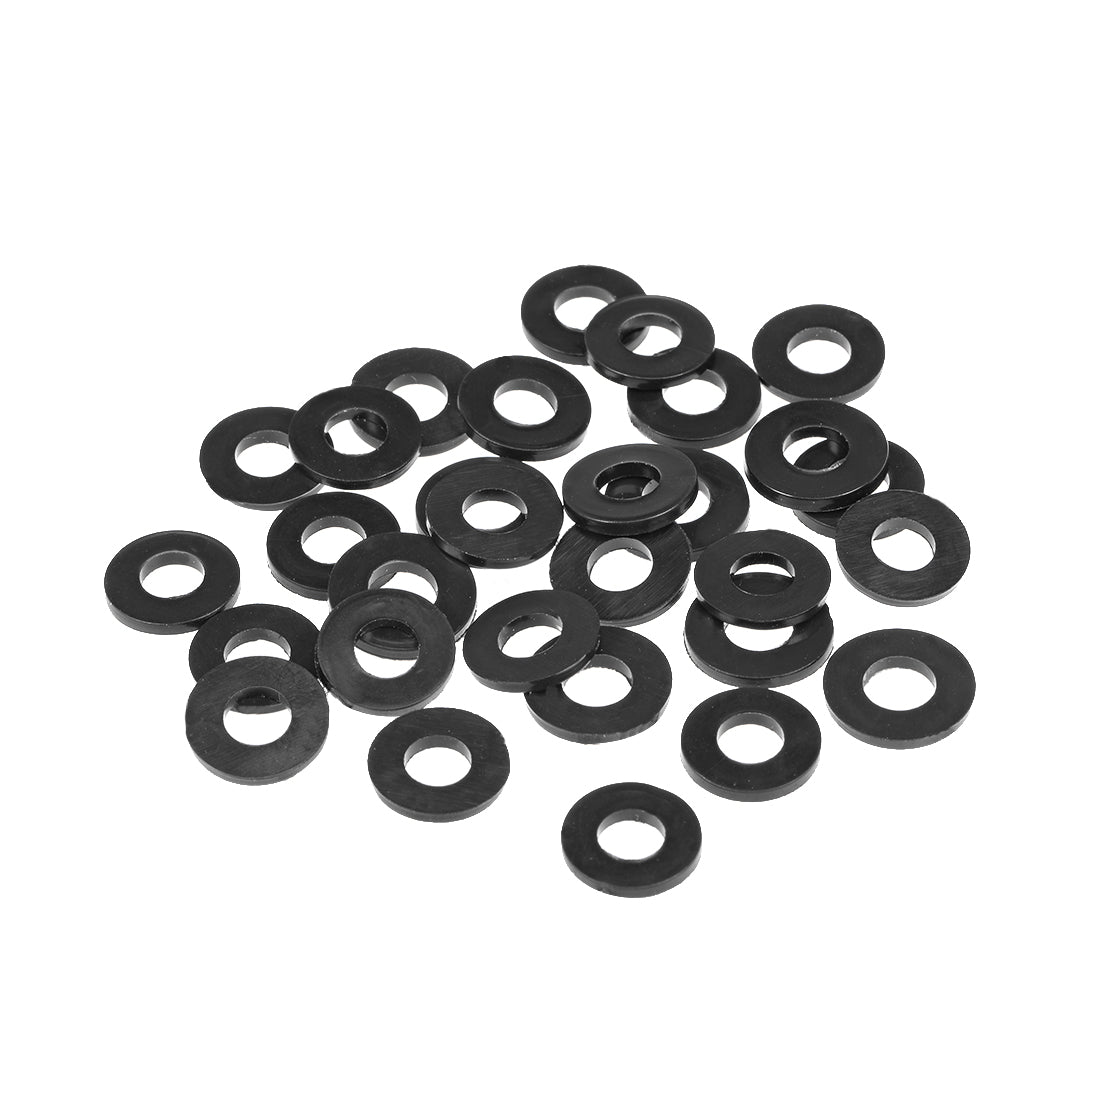 uxcell Uxcell Rubber Flat Washers, Inner Diameter Thick 30pcs